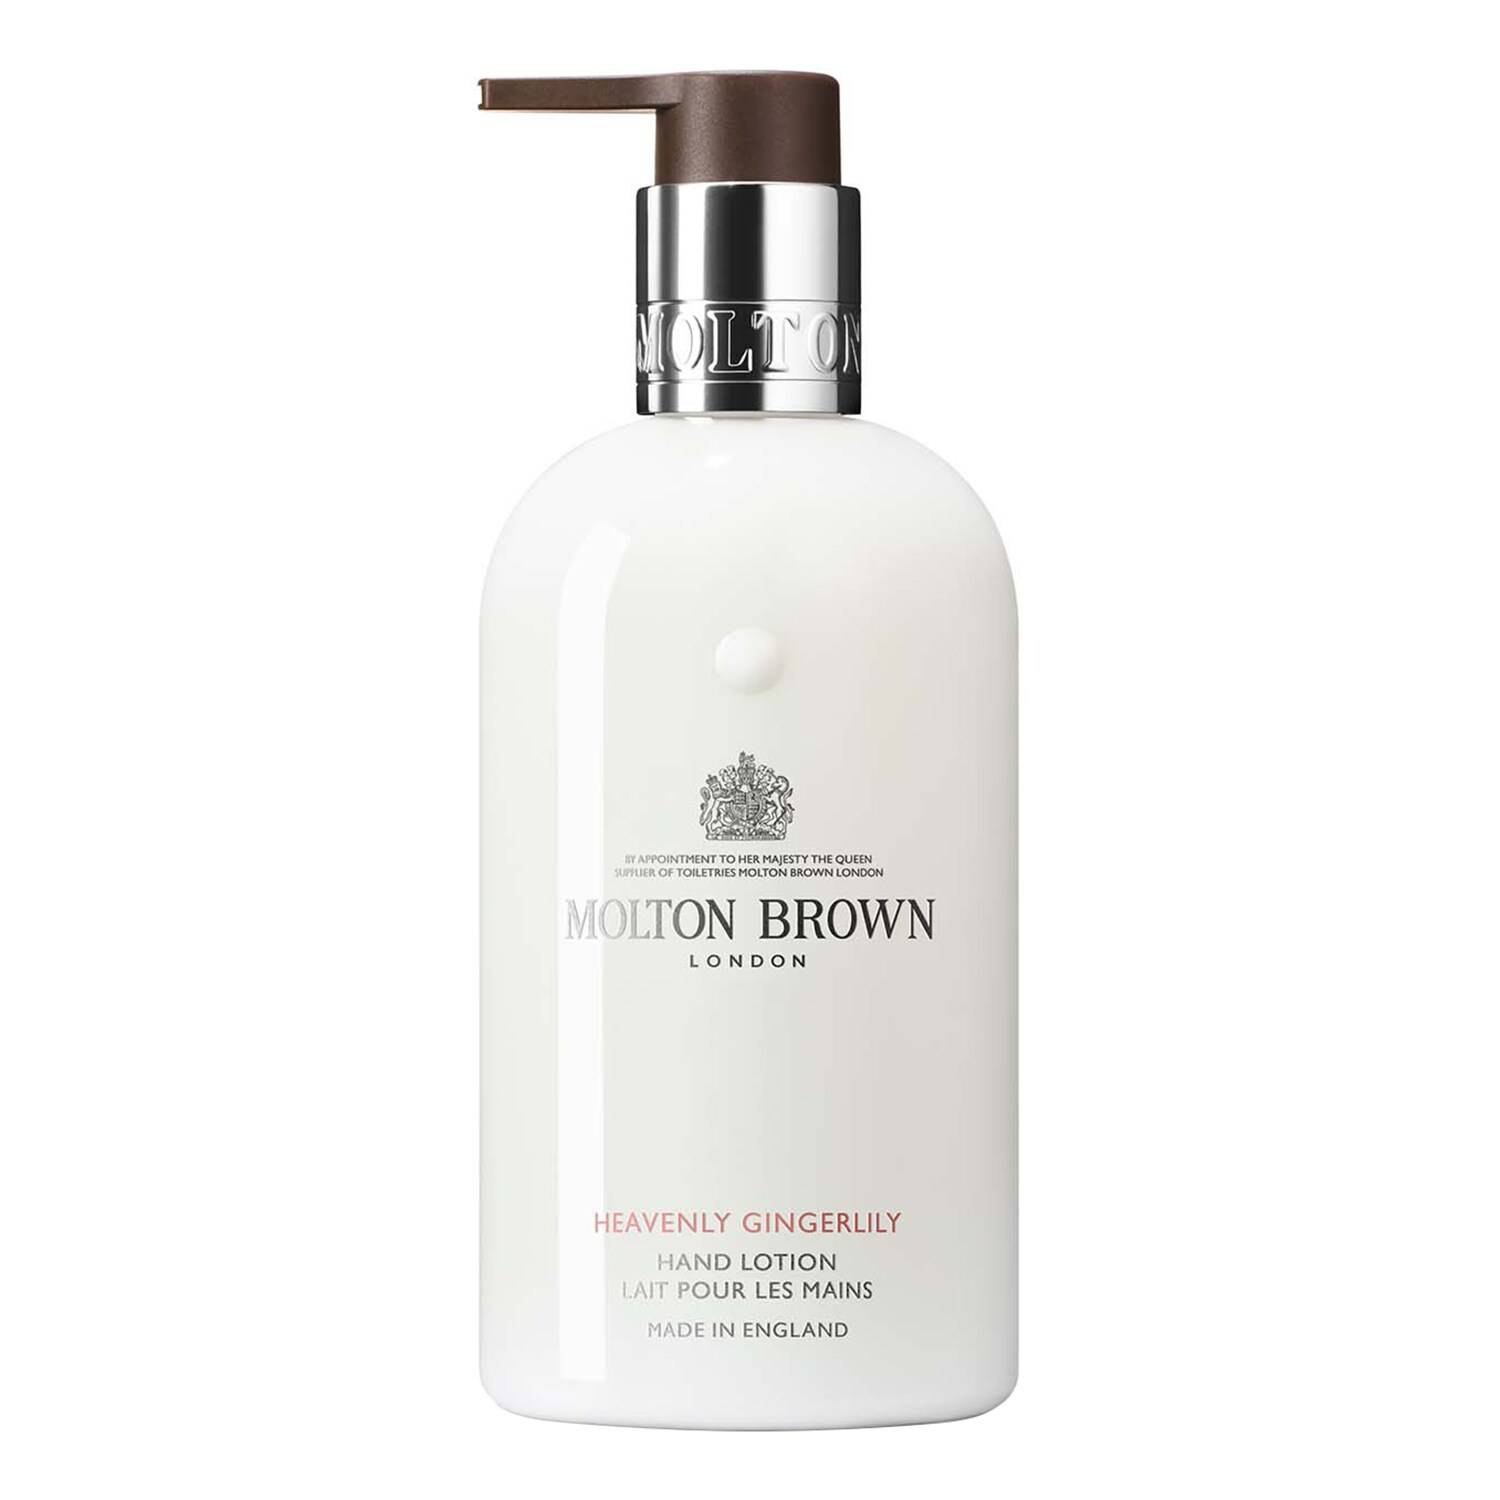 Molton Brown Heavenly Gingerlily Hand Lotion 300Ml